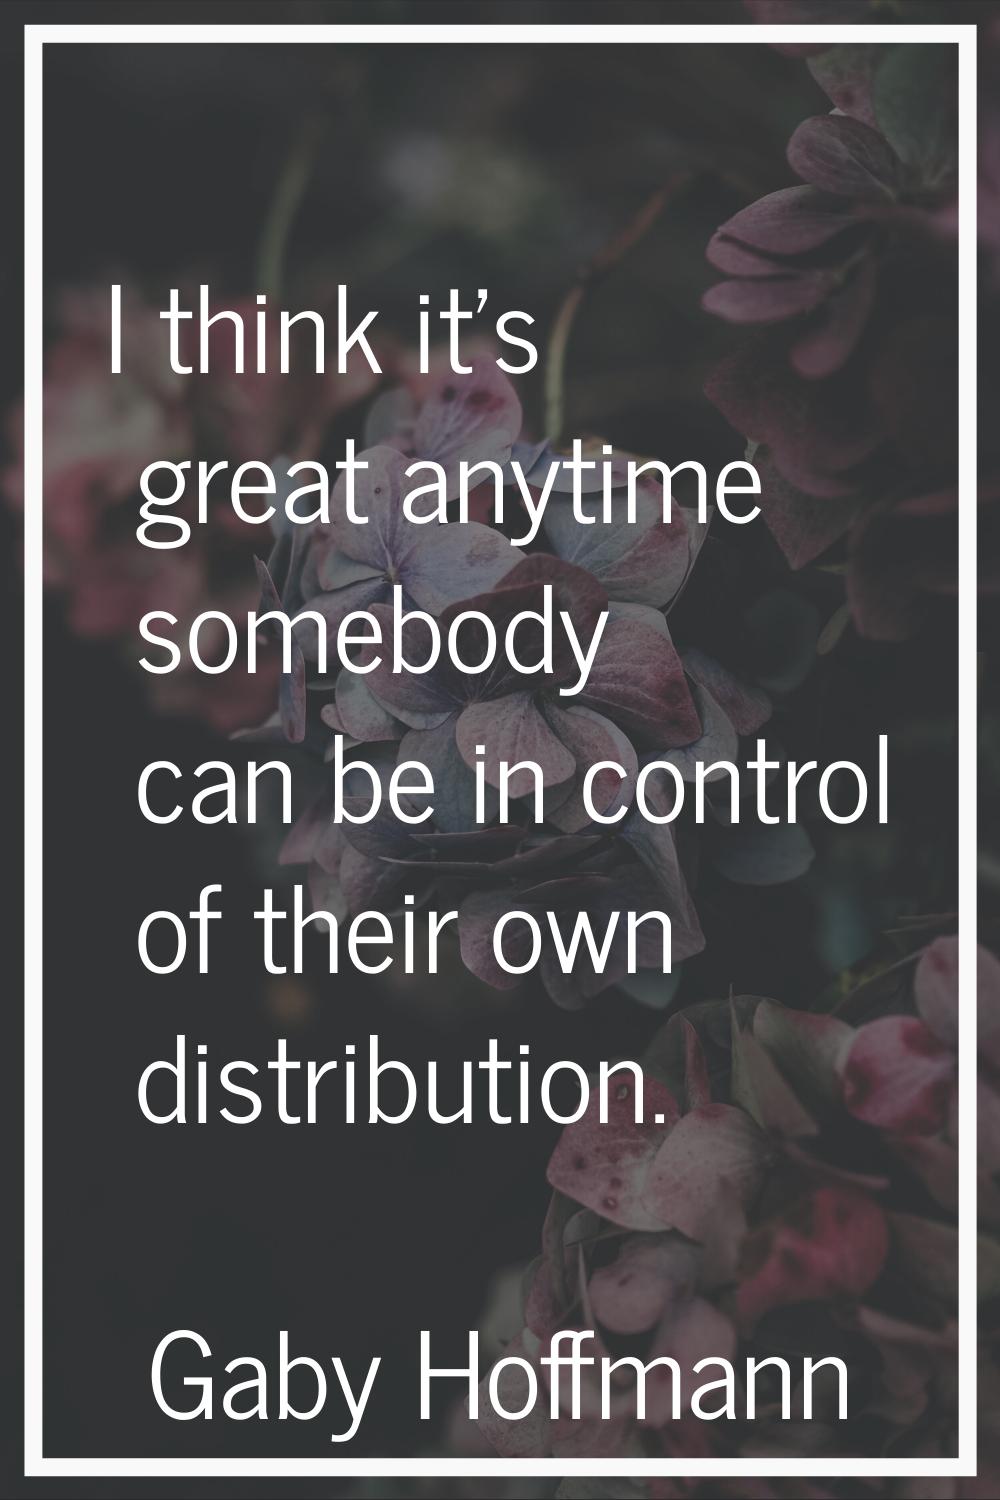 I think it's great anytime somebody can be in control of their own distribution.